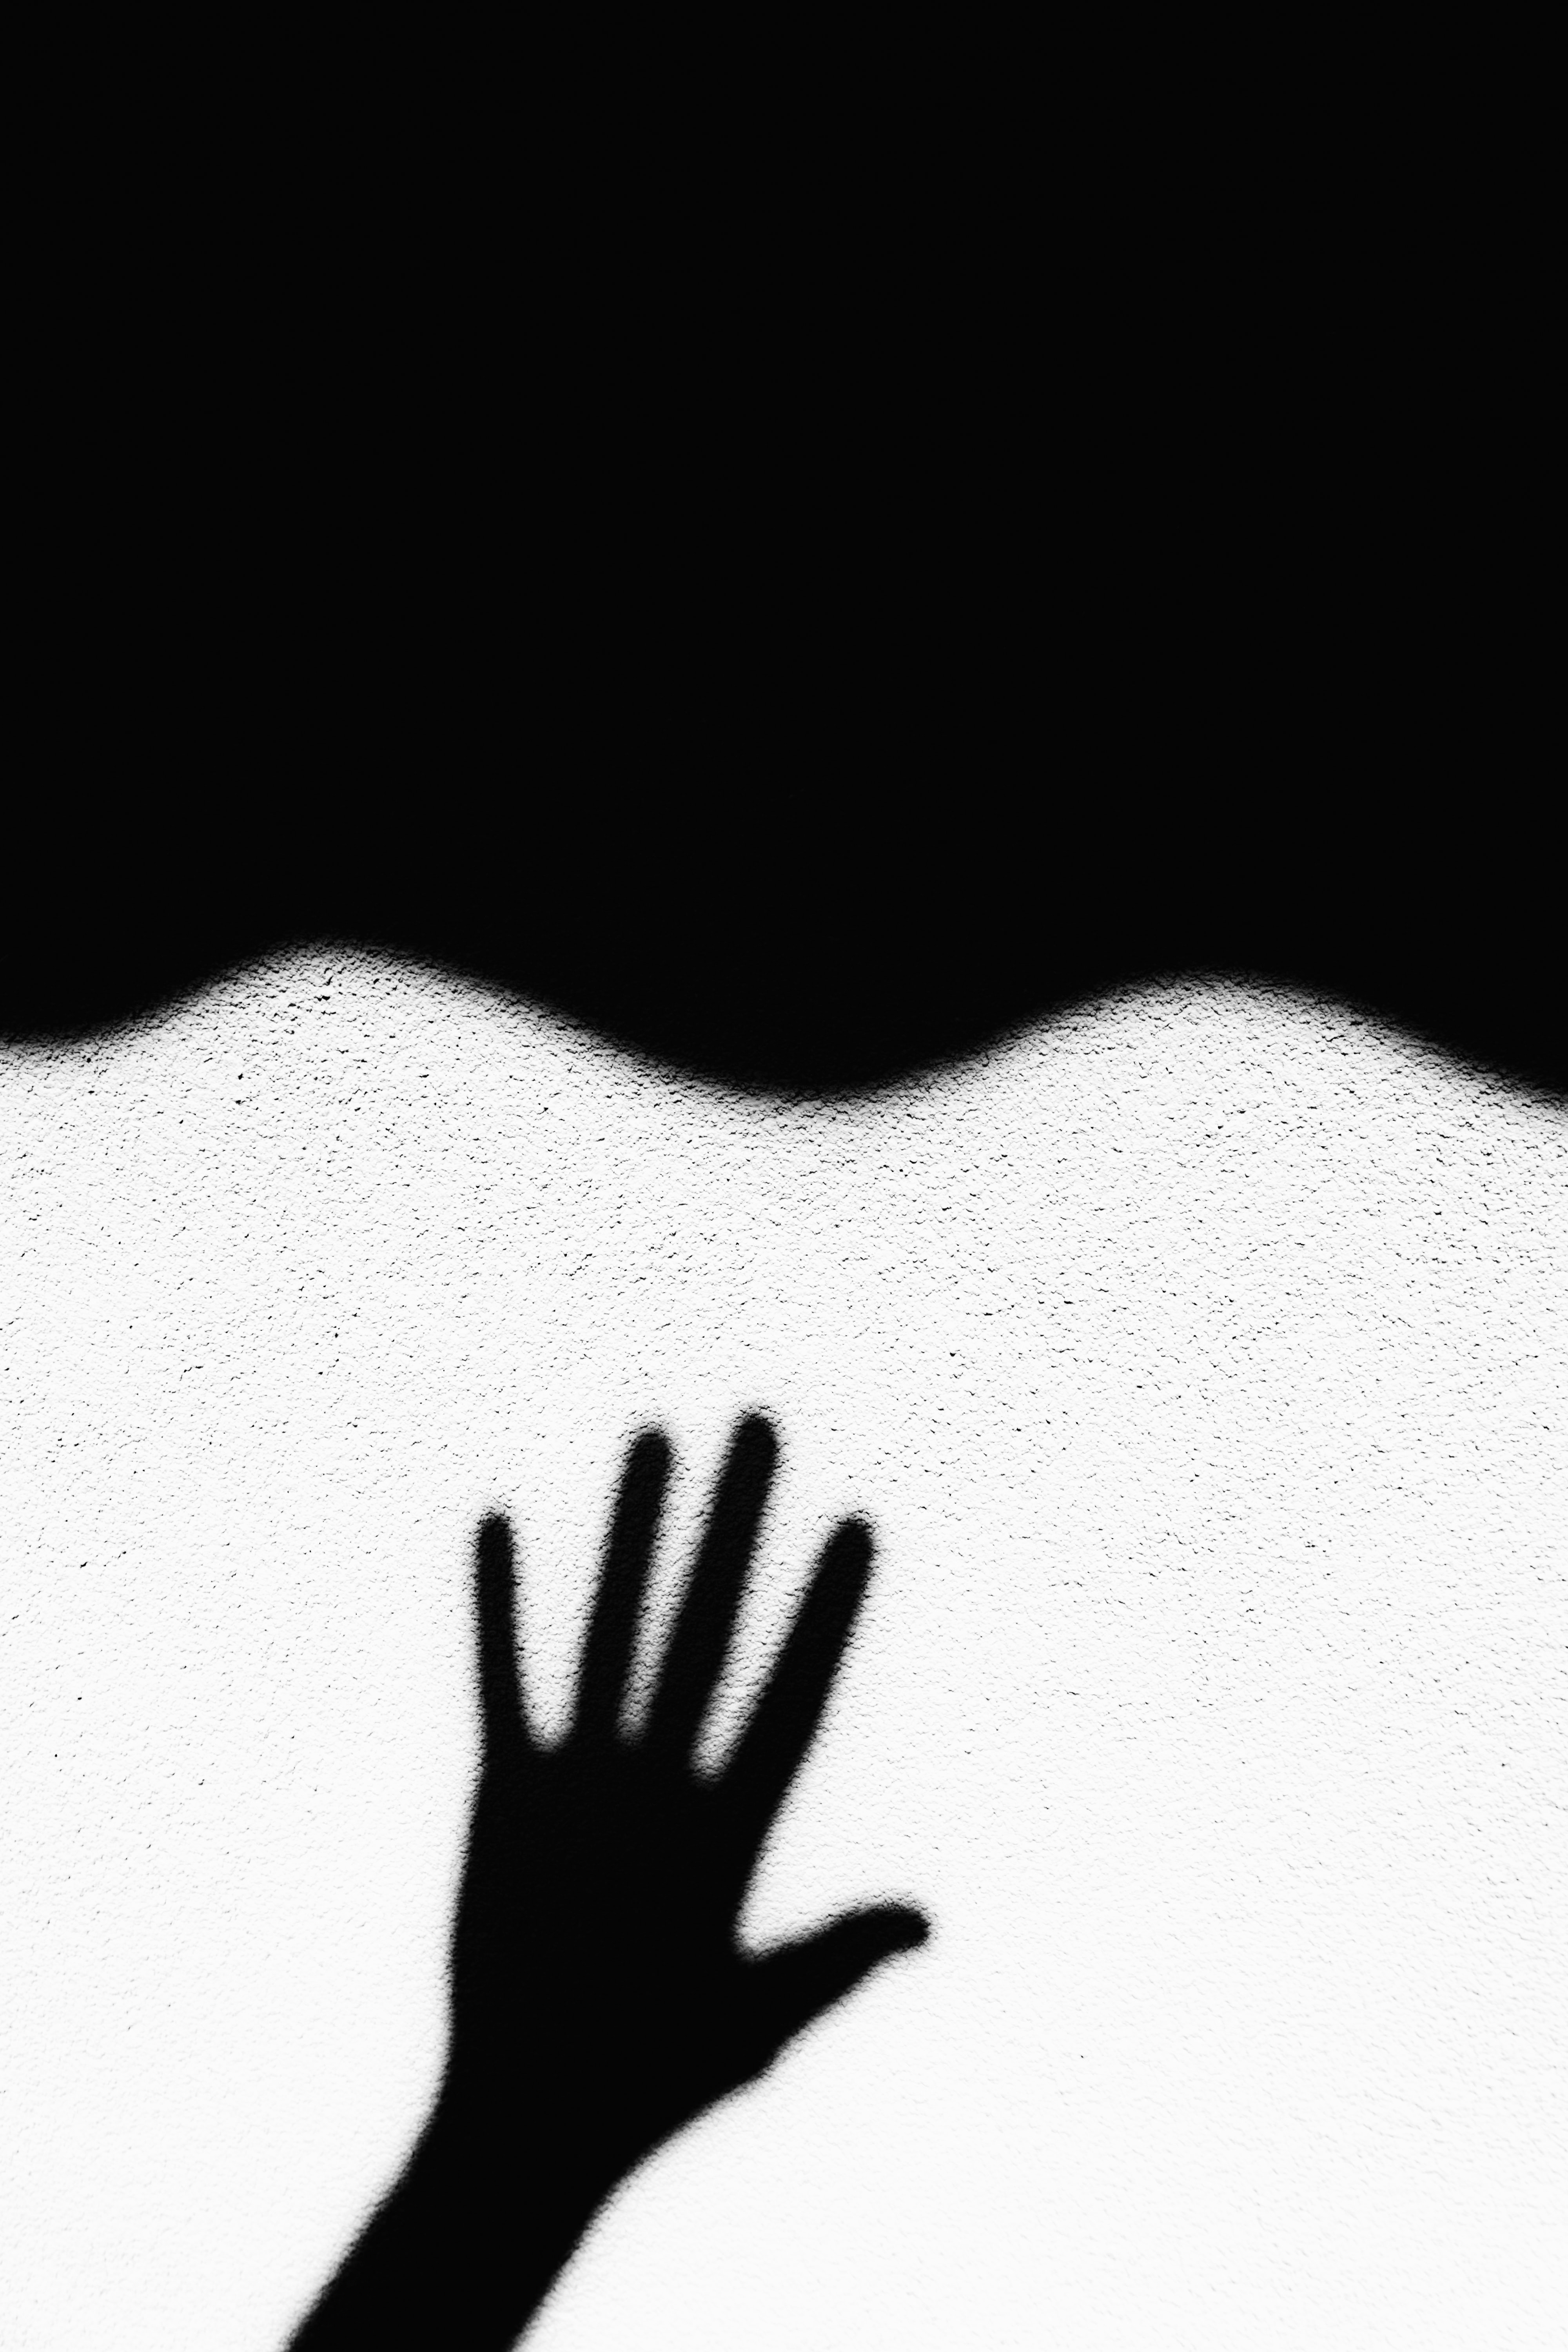 black and white, hand, miscellanea, miscellaneous, shadow, wall, bw, chb